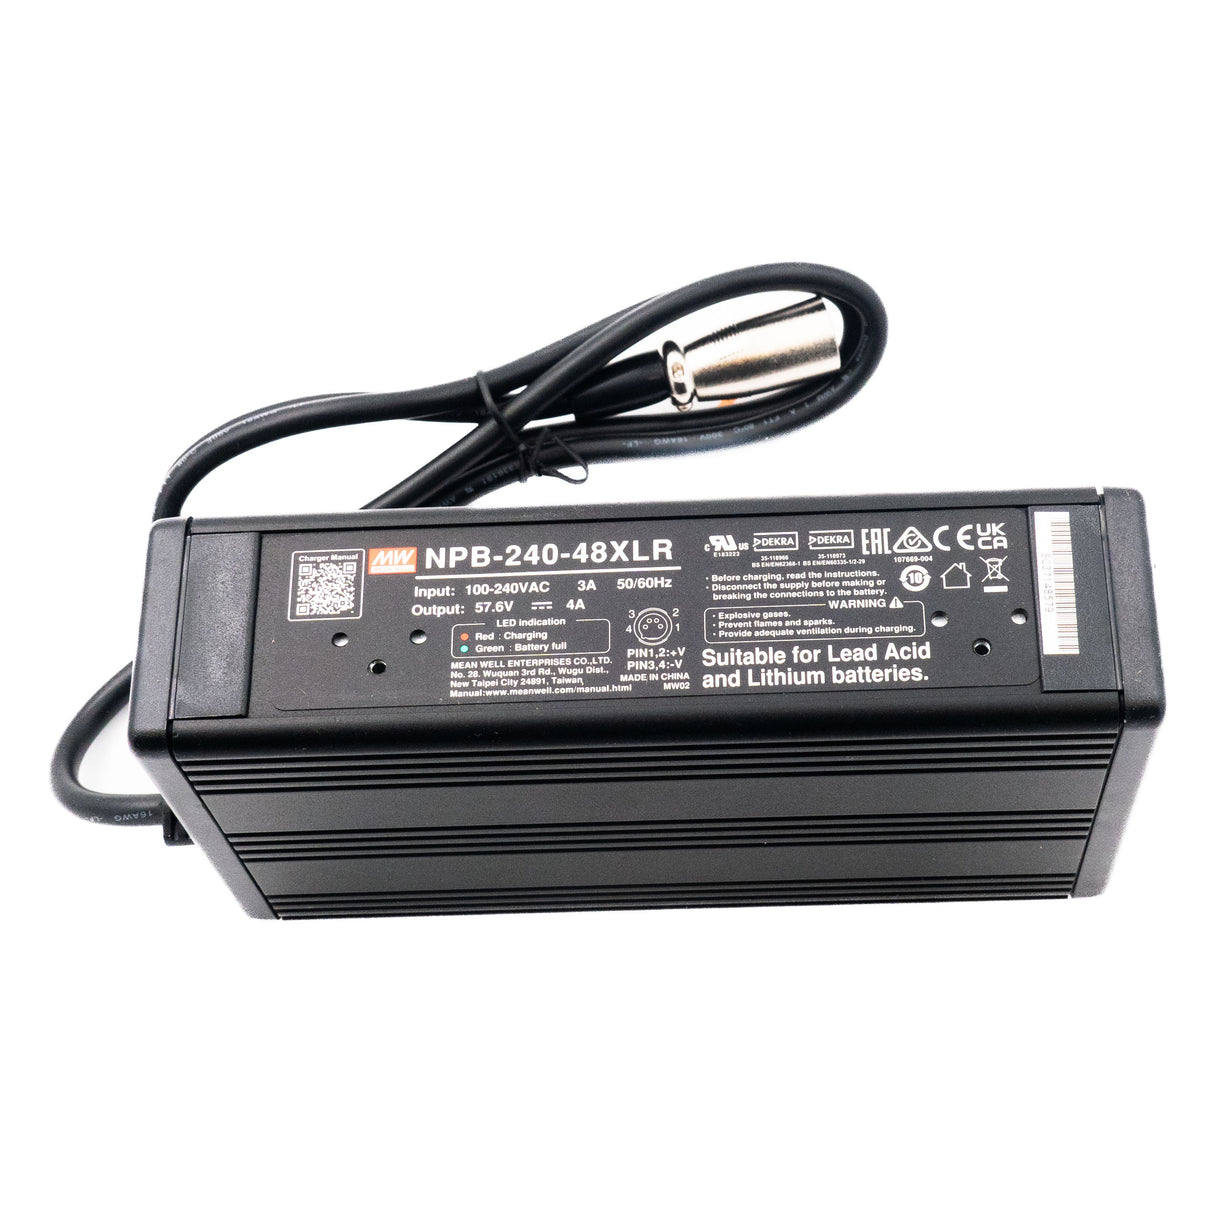 Mean Well NPB-240-48XLR Battery Charger 240W 48V 3 Pin Power Pin - PHOTO 1